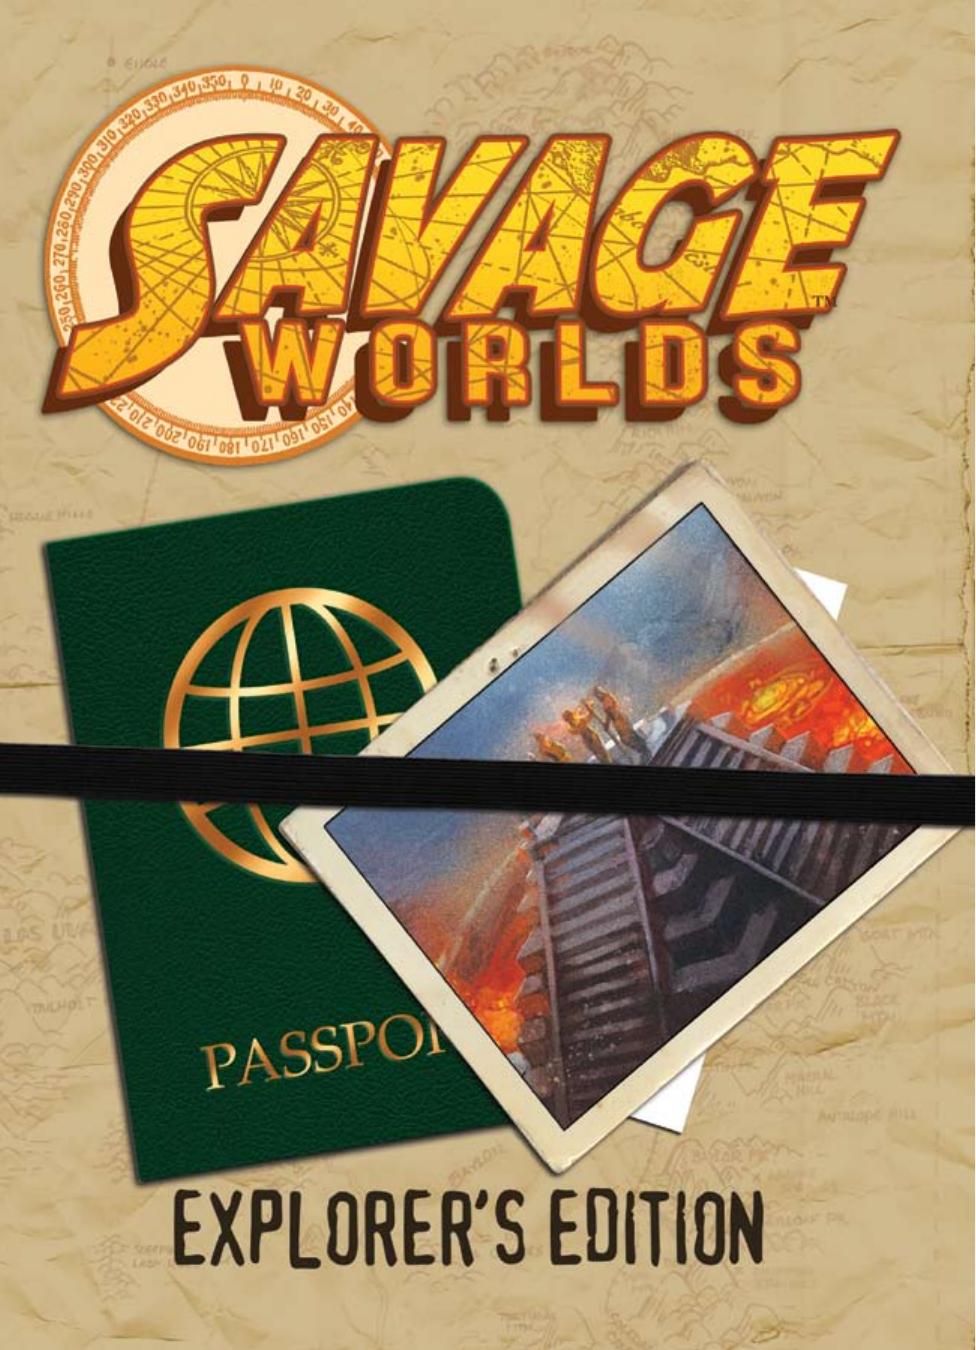 SAVAGE WORLDS [CORE] by Explorer's Edition (PF)